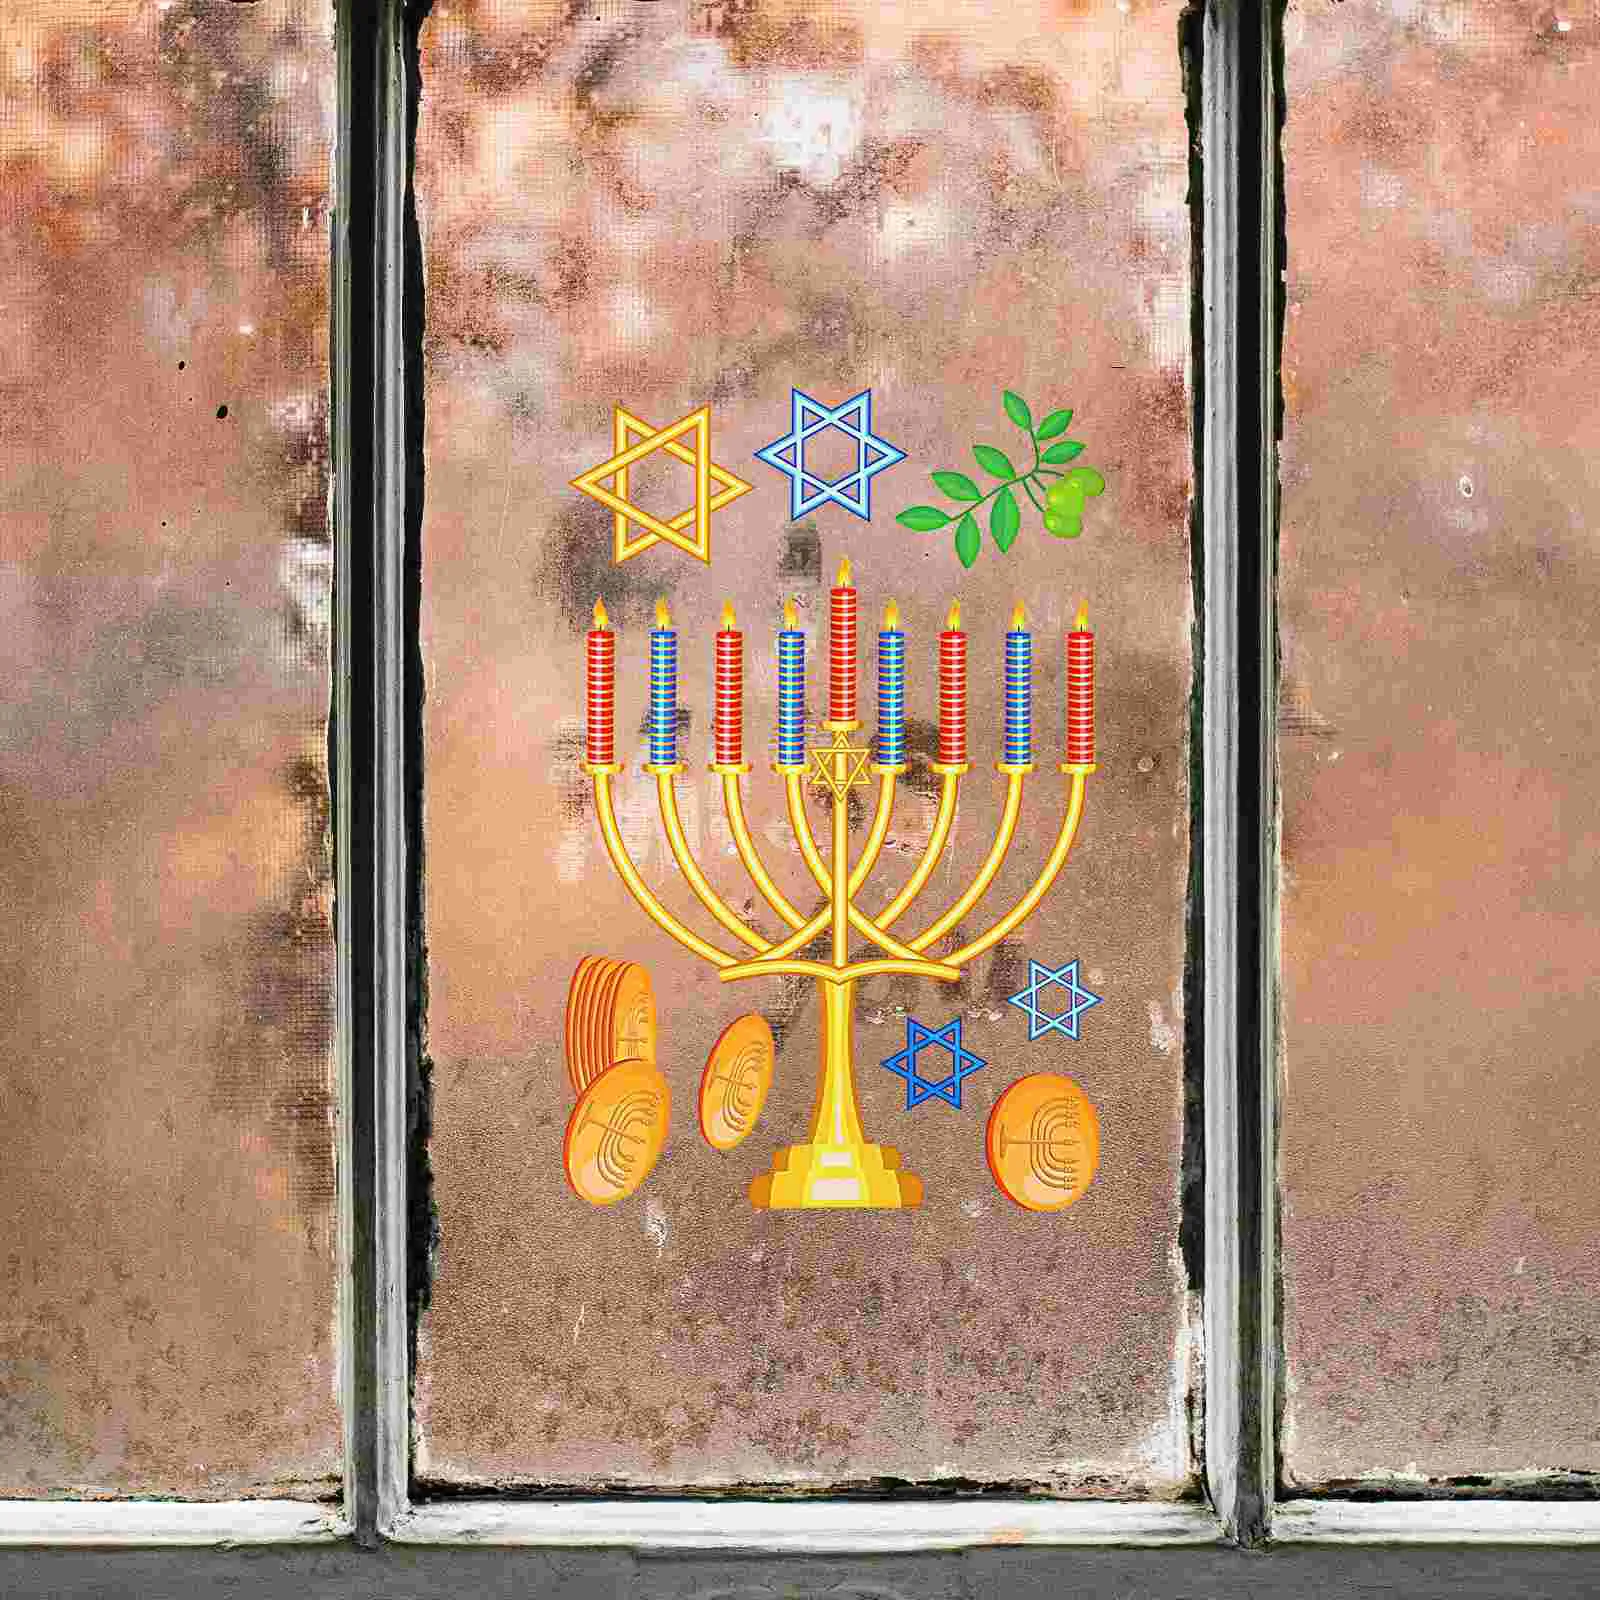 

9 Sheets Hanukkah Window Cling for Home Window Clings Decorative Window Decals Decoration